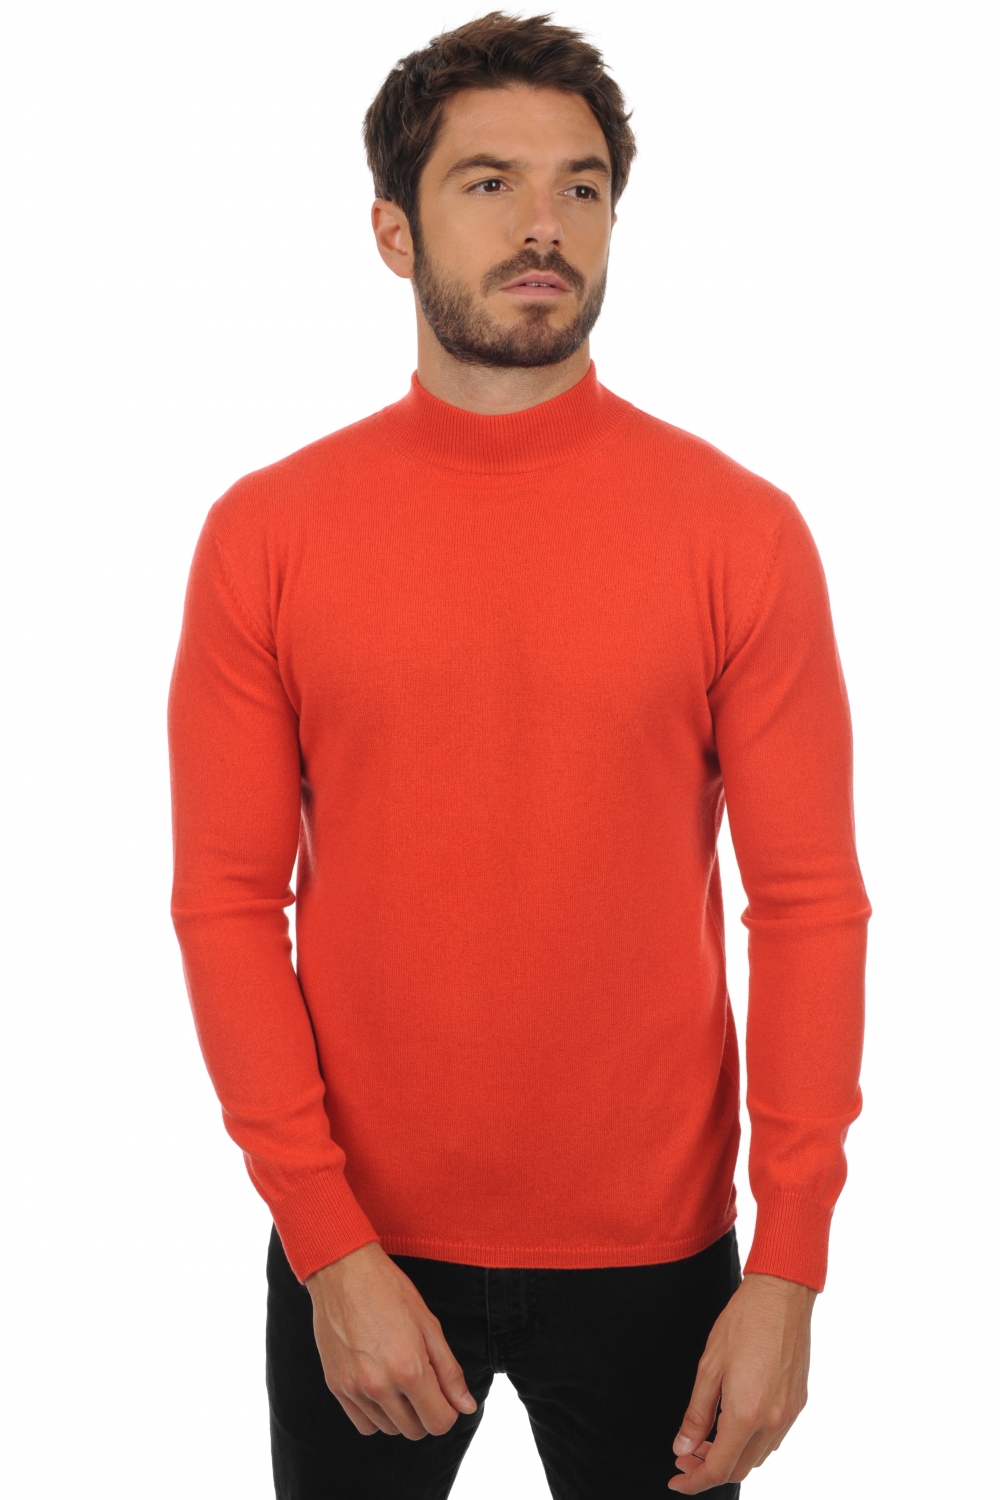 Cashmere men roll neck frederic coral 3xl